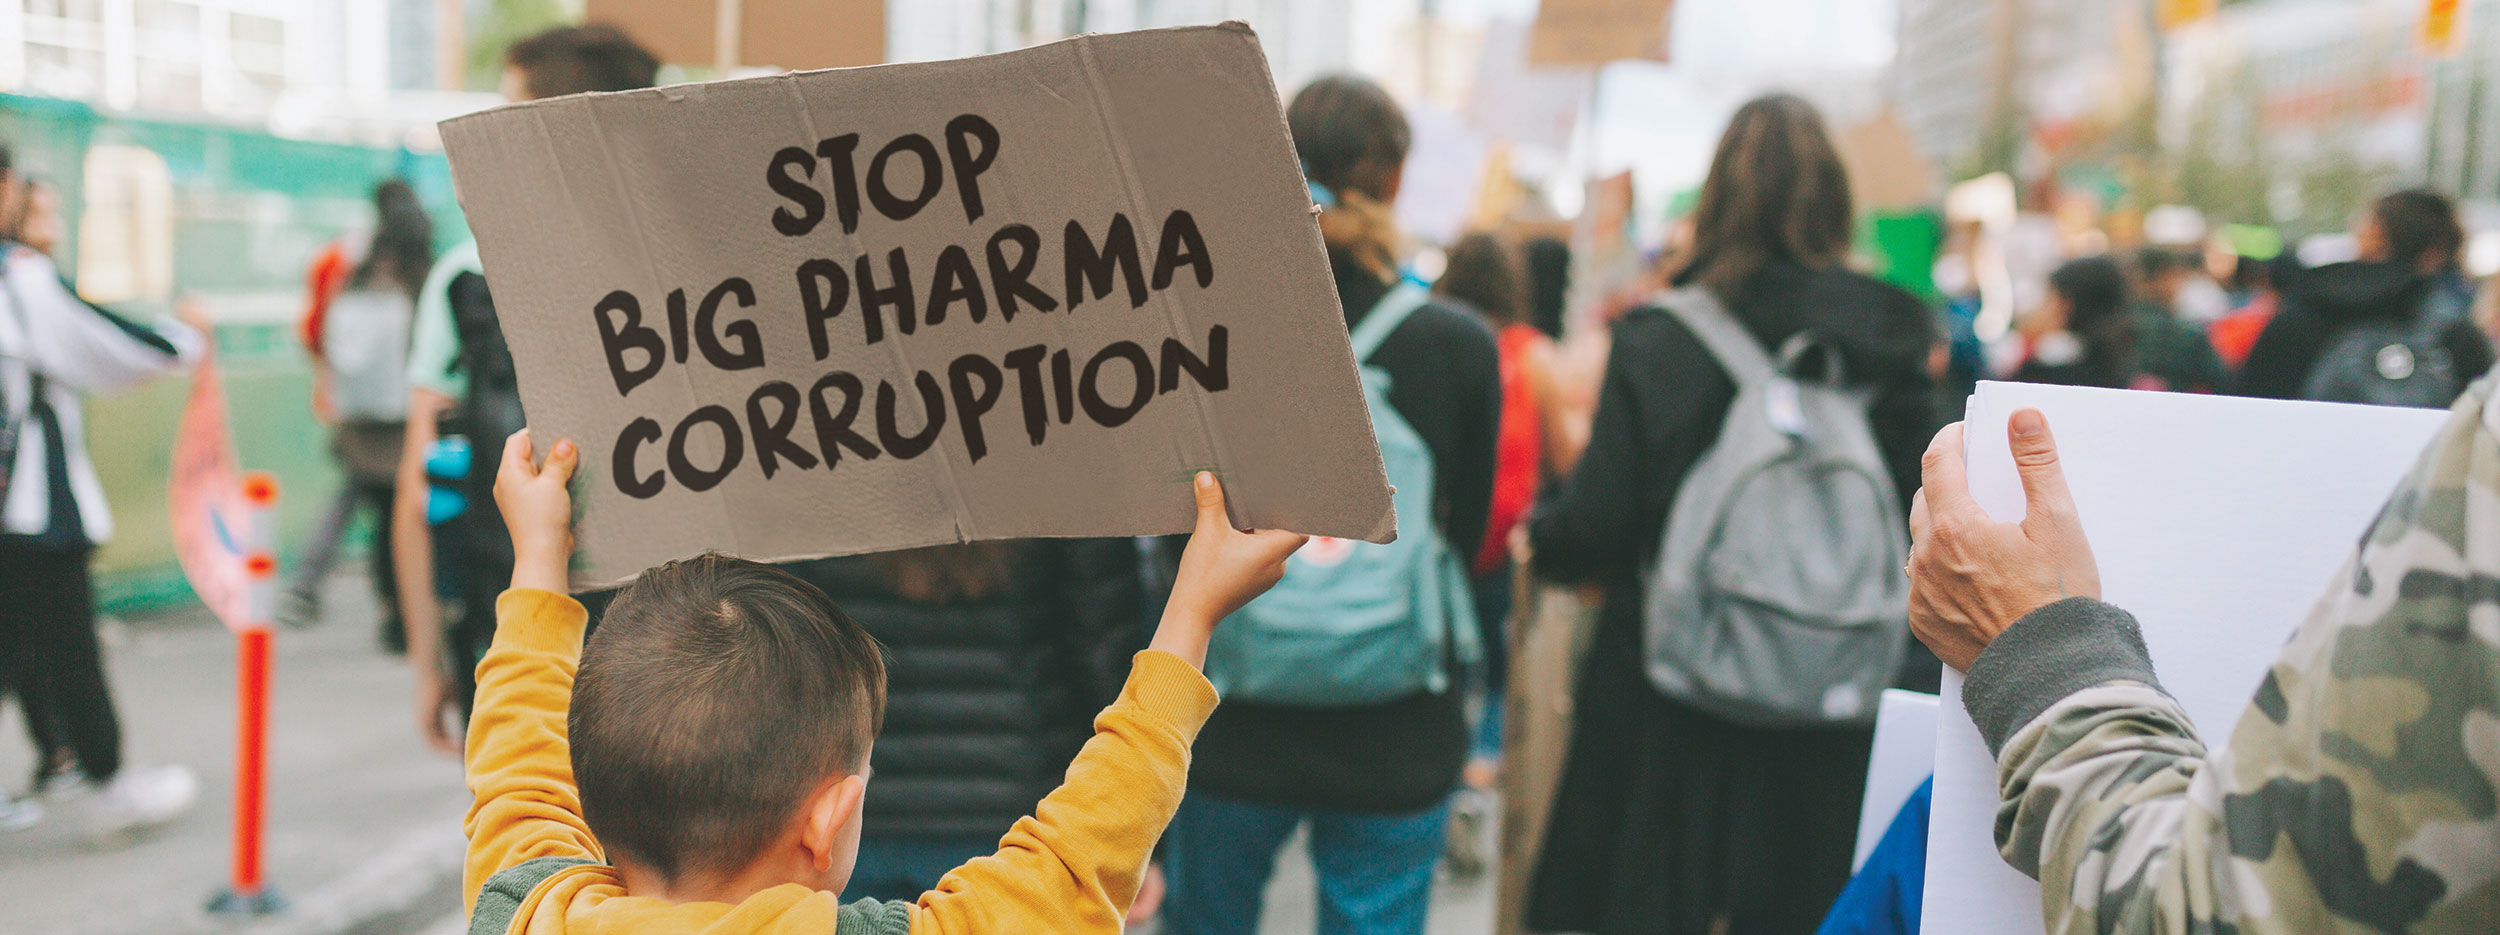 Photo of young boy among other protesters holding a cardboard sign saying Stop Big Pharma Corruption